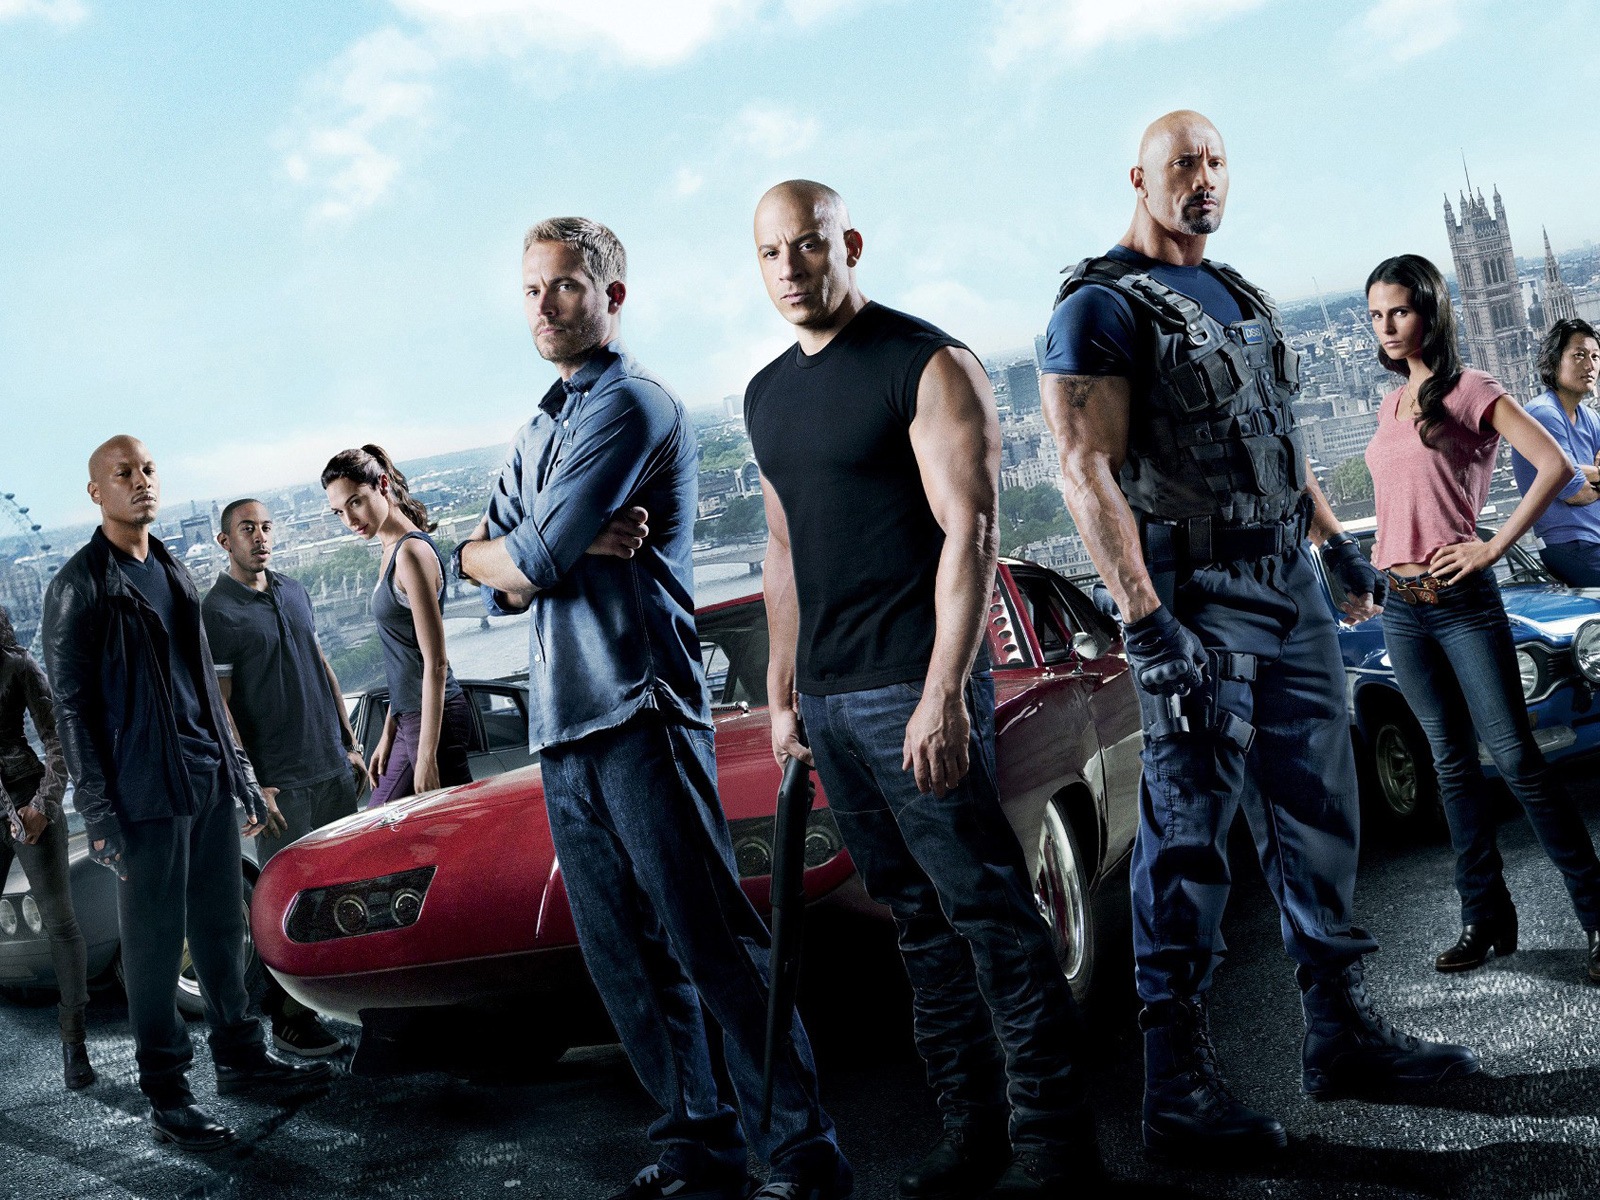 Fast And Furious 6 HD movie wallpapers #1 - 1600x1200